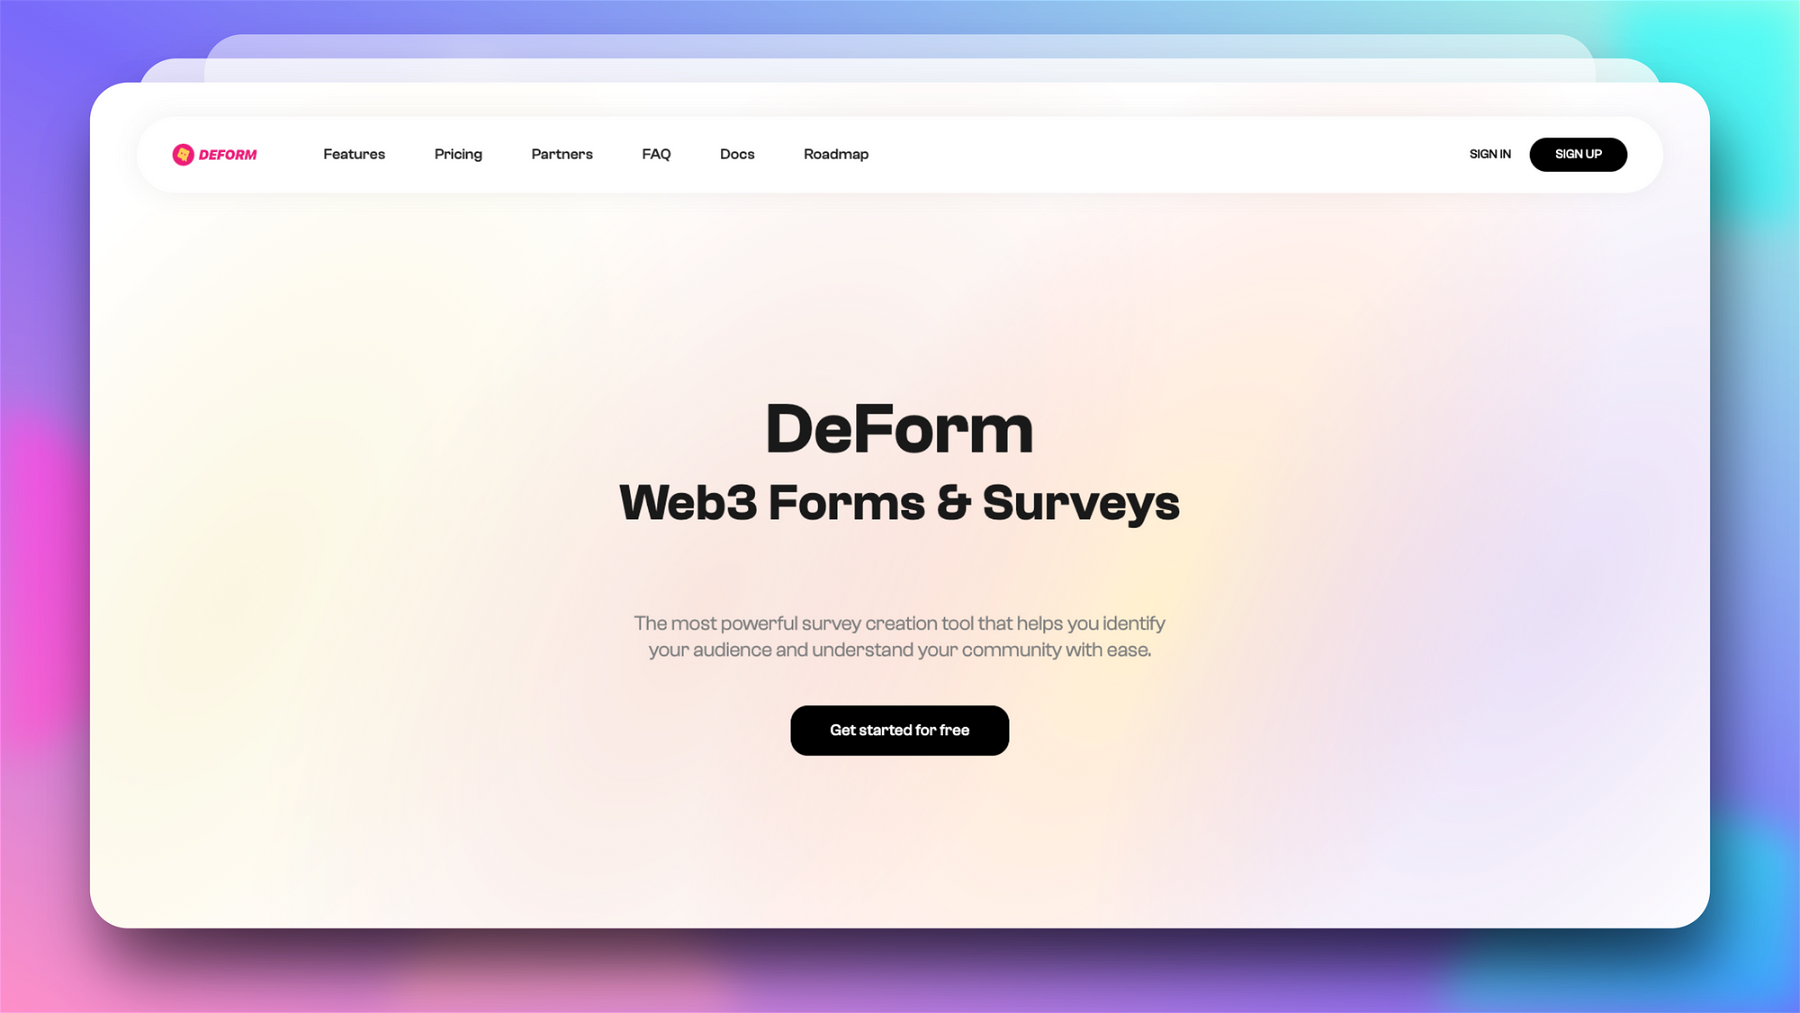 This is DeForm’s landing page, located at deform.cc!